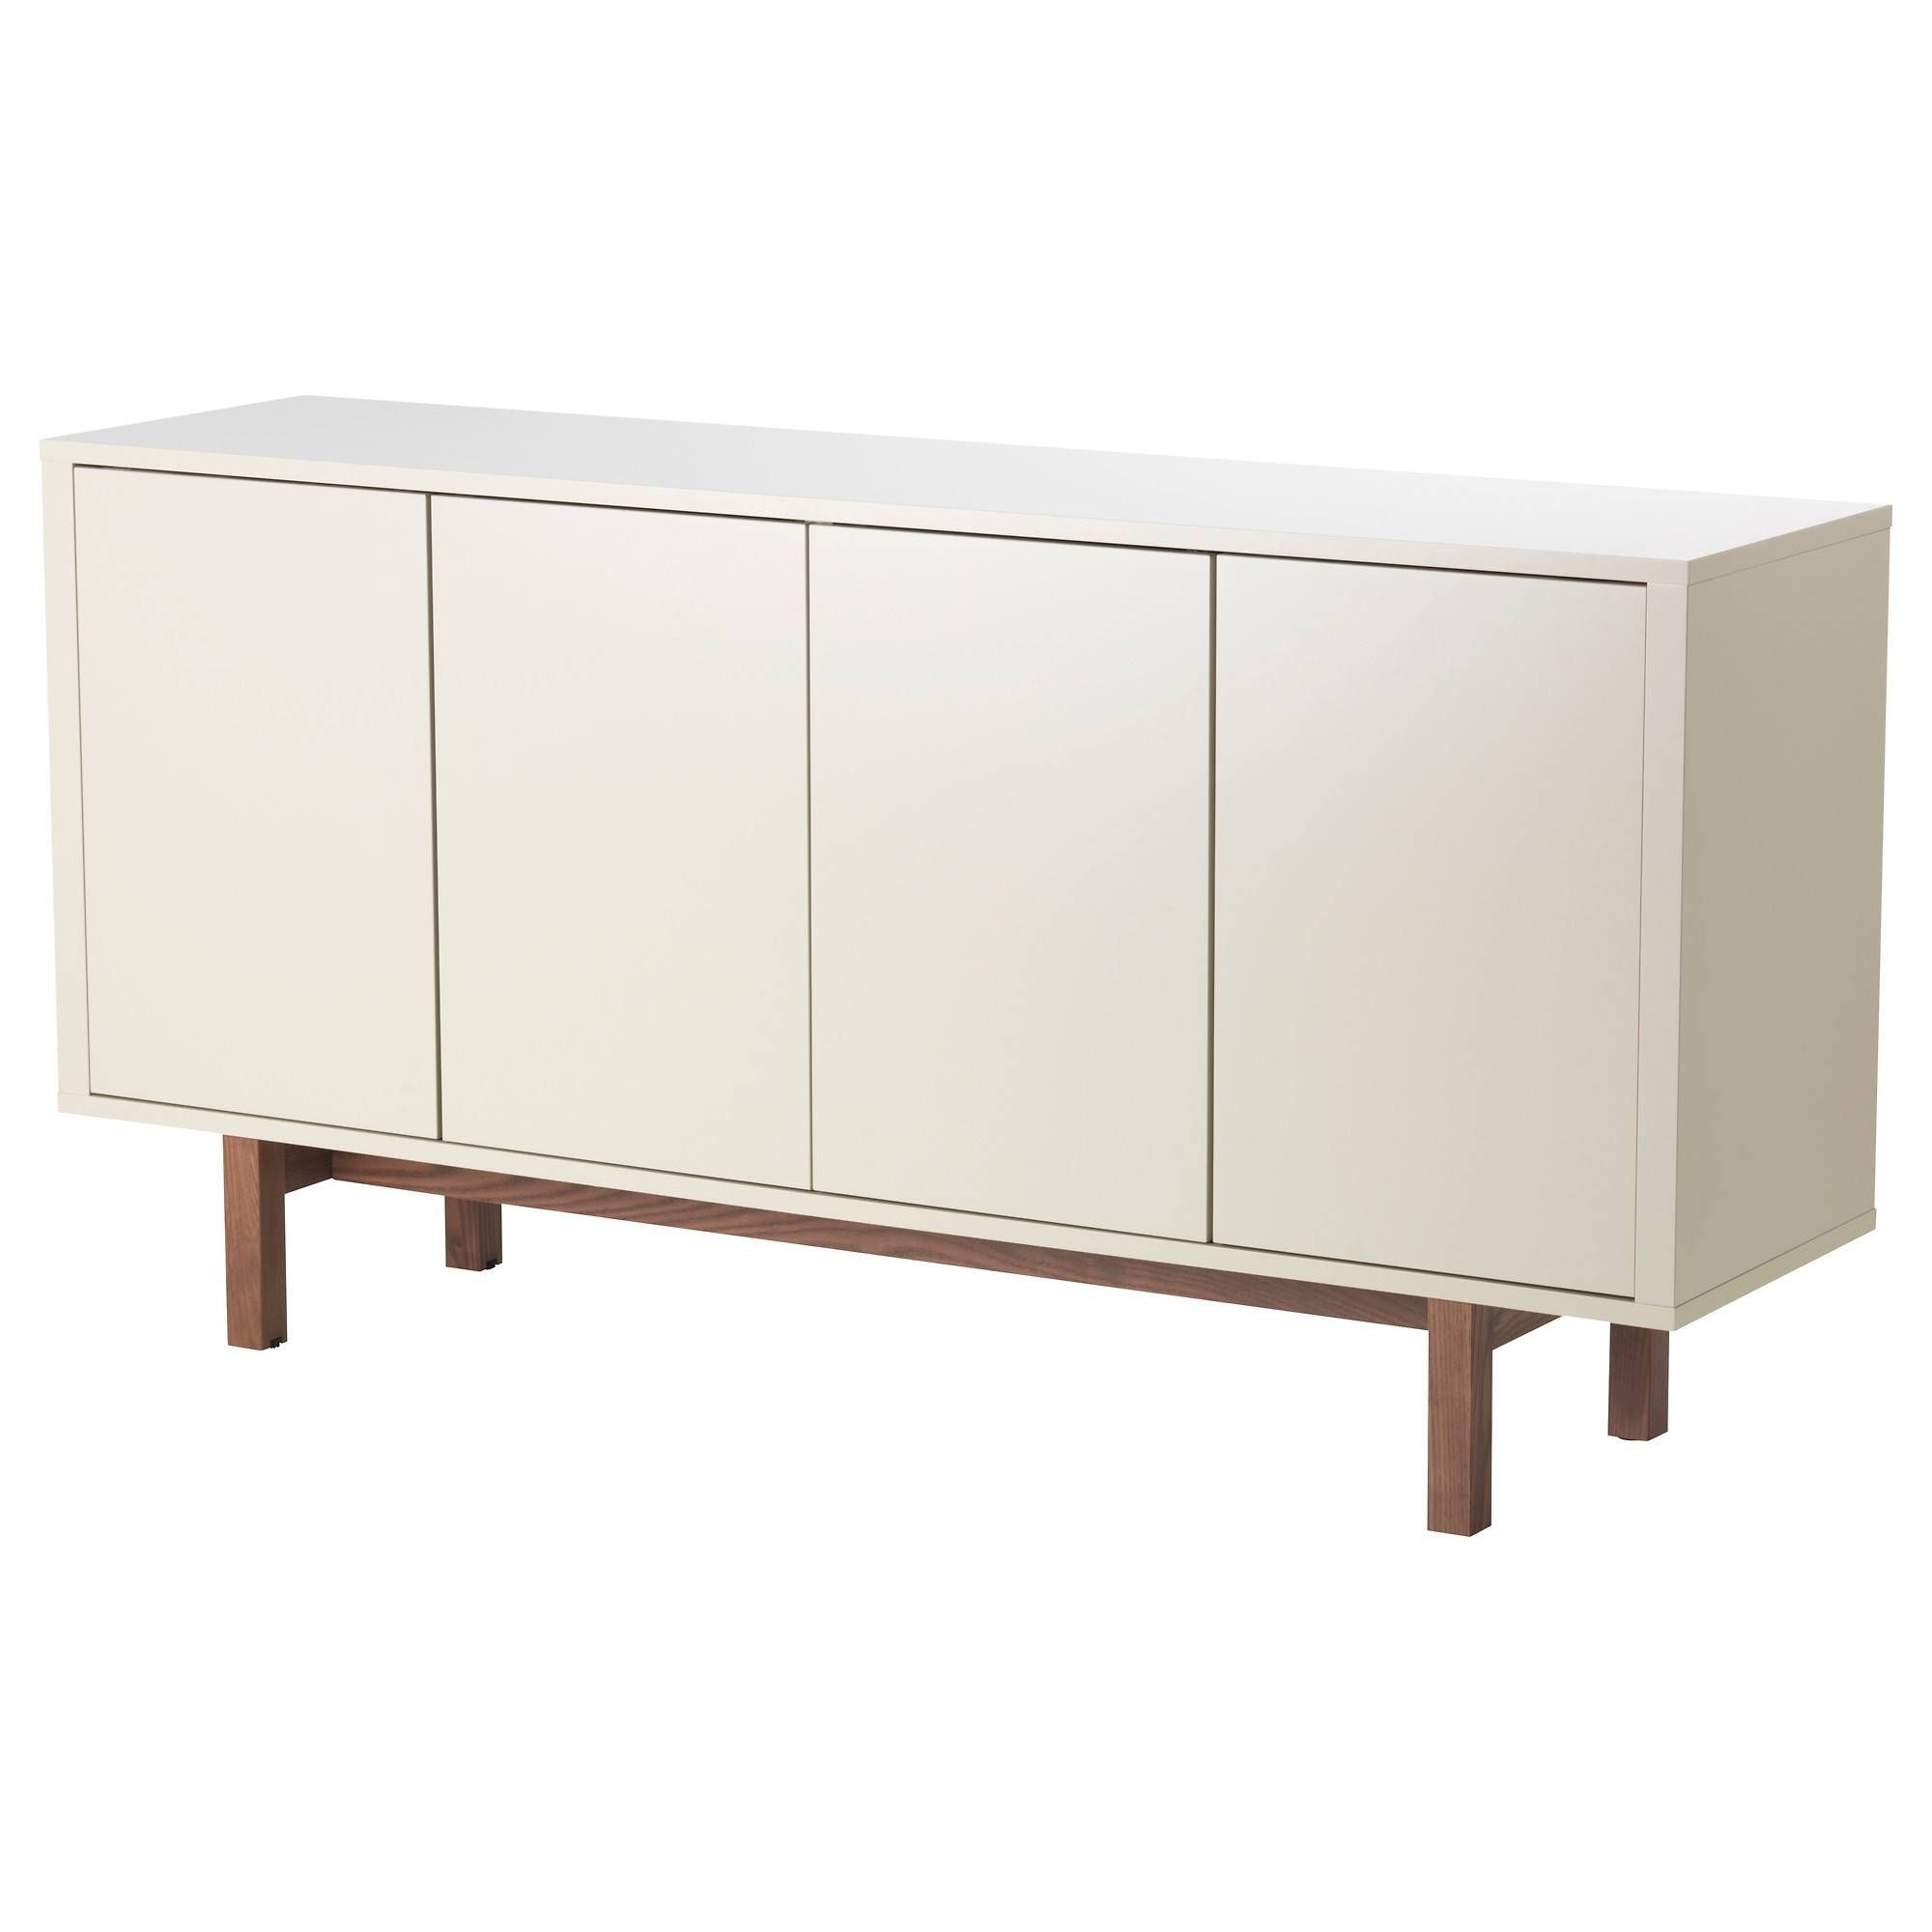 Awesome Ikea Stockholm Sideboard – Bjdgjy With Ikea Sideboards (View 7 of 15)